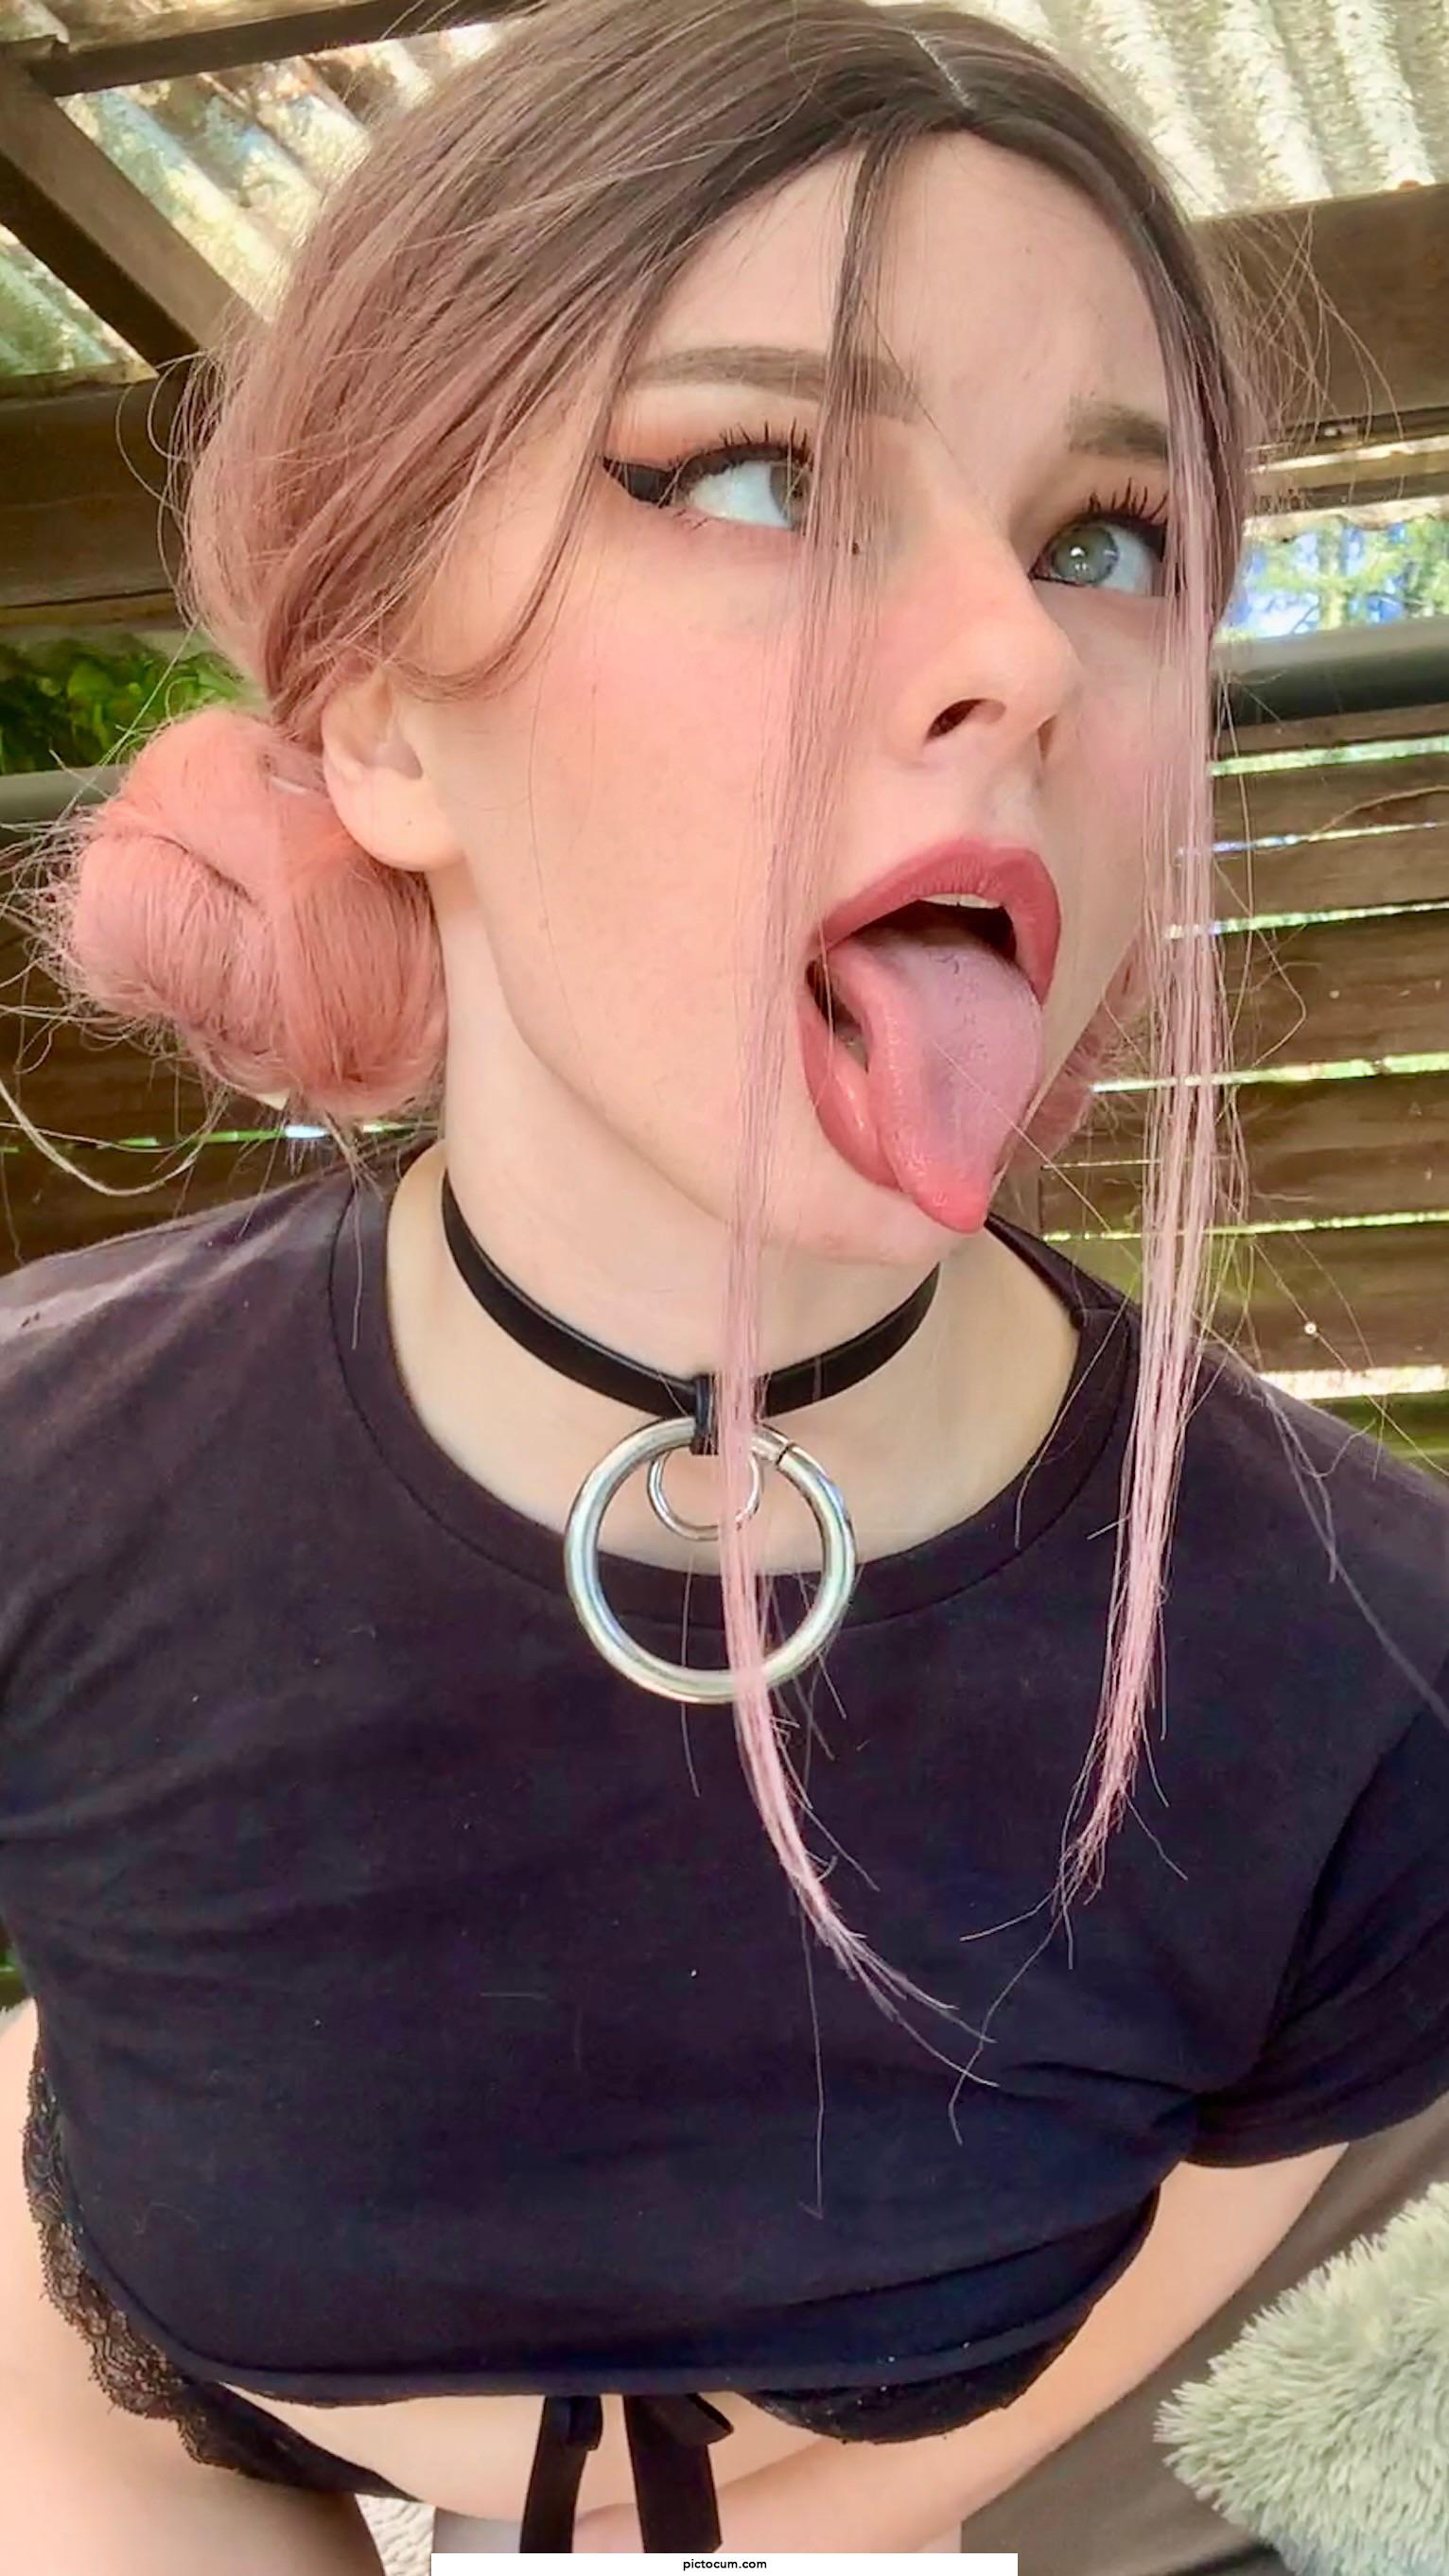 Every day my tongue becomes more like a tentacle. . what do you think? 🐙👅